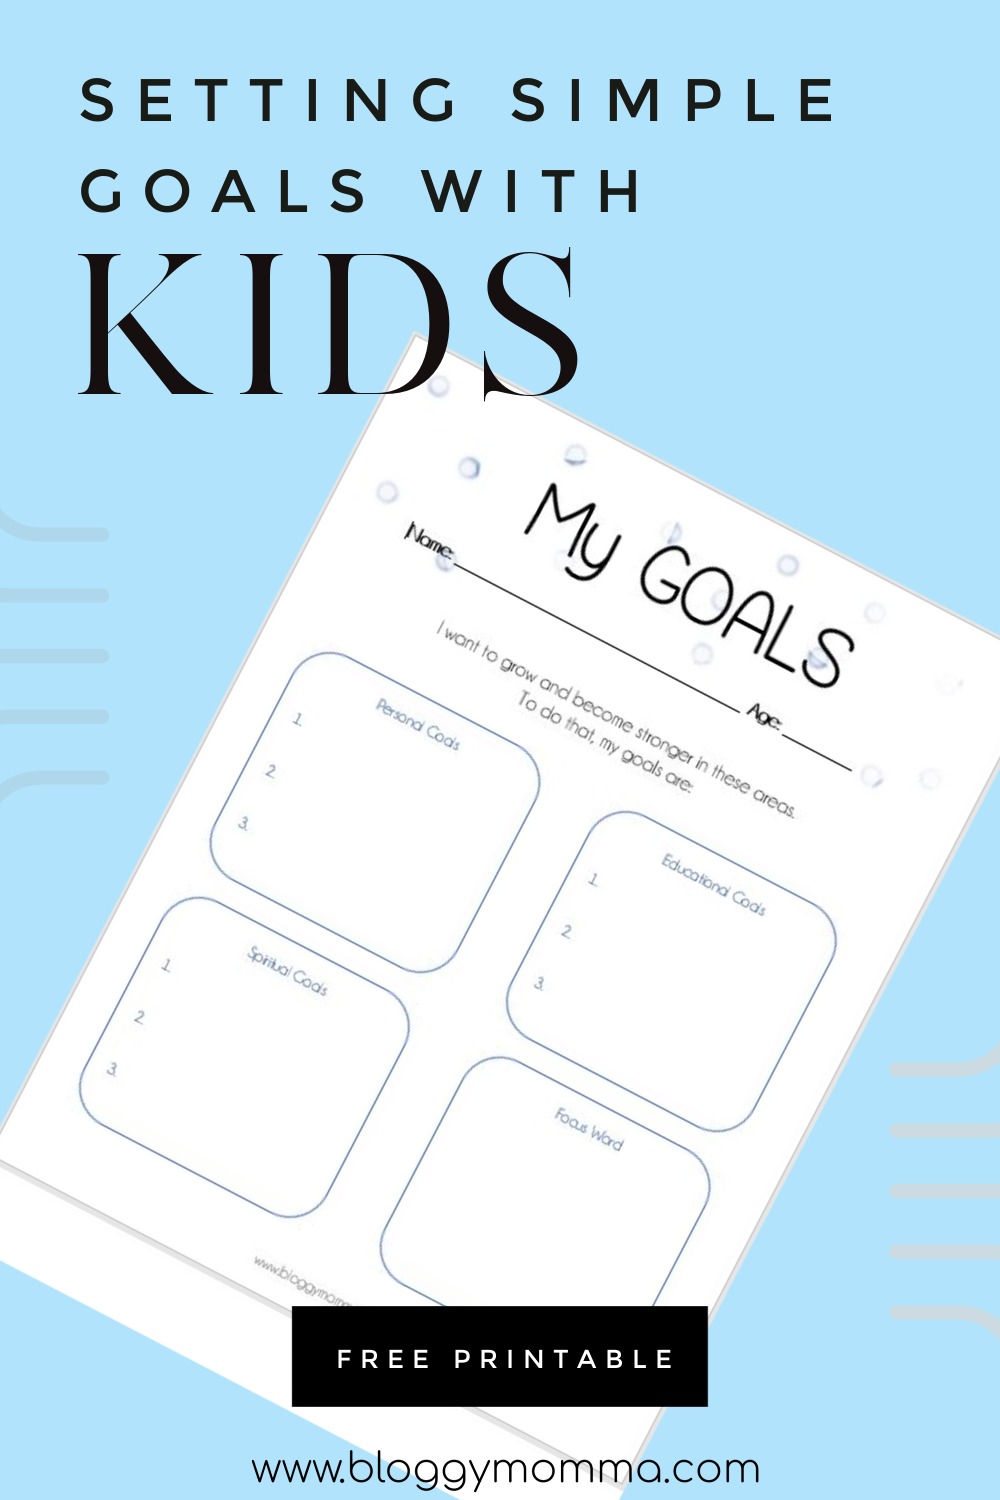 SETTING SIMPLE GOALS WITH YOUR KIDS - Bloggy Momma